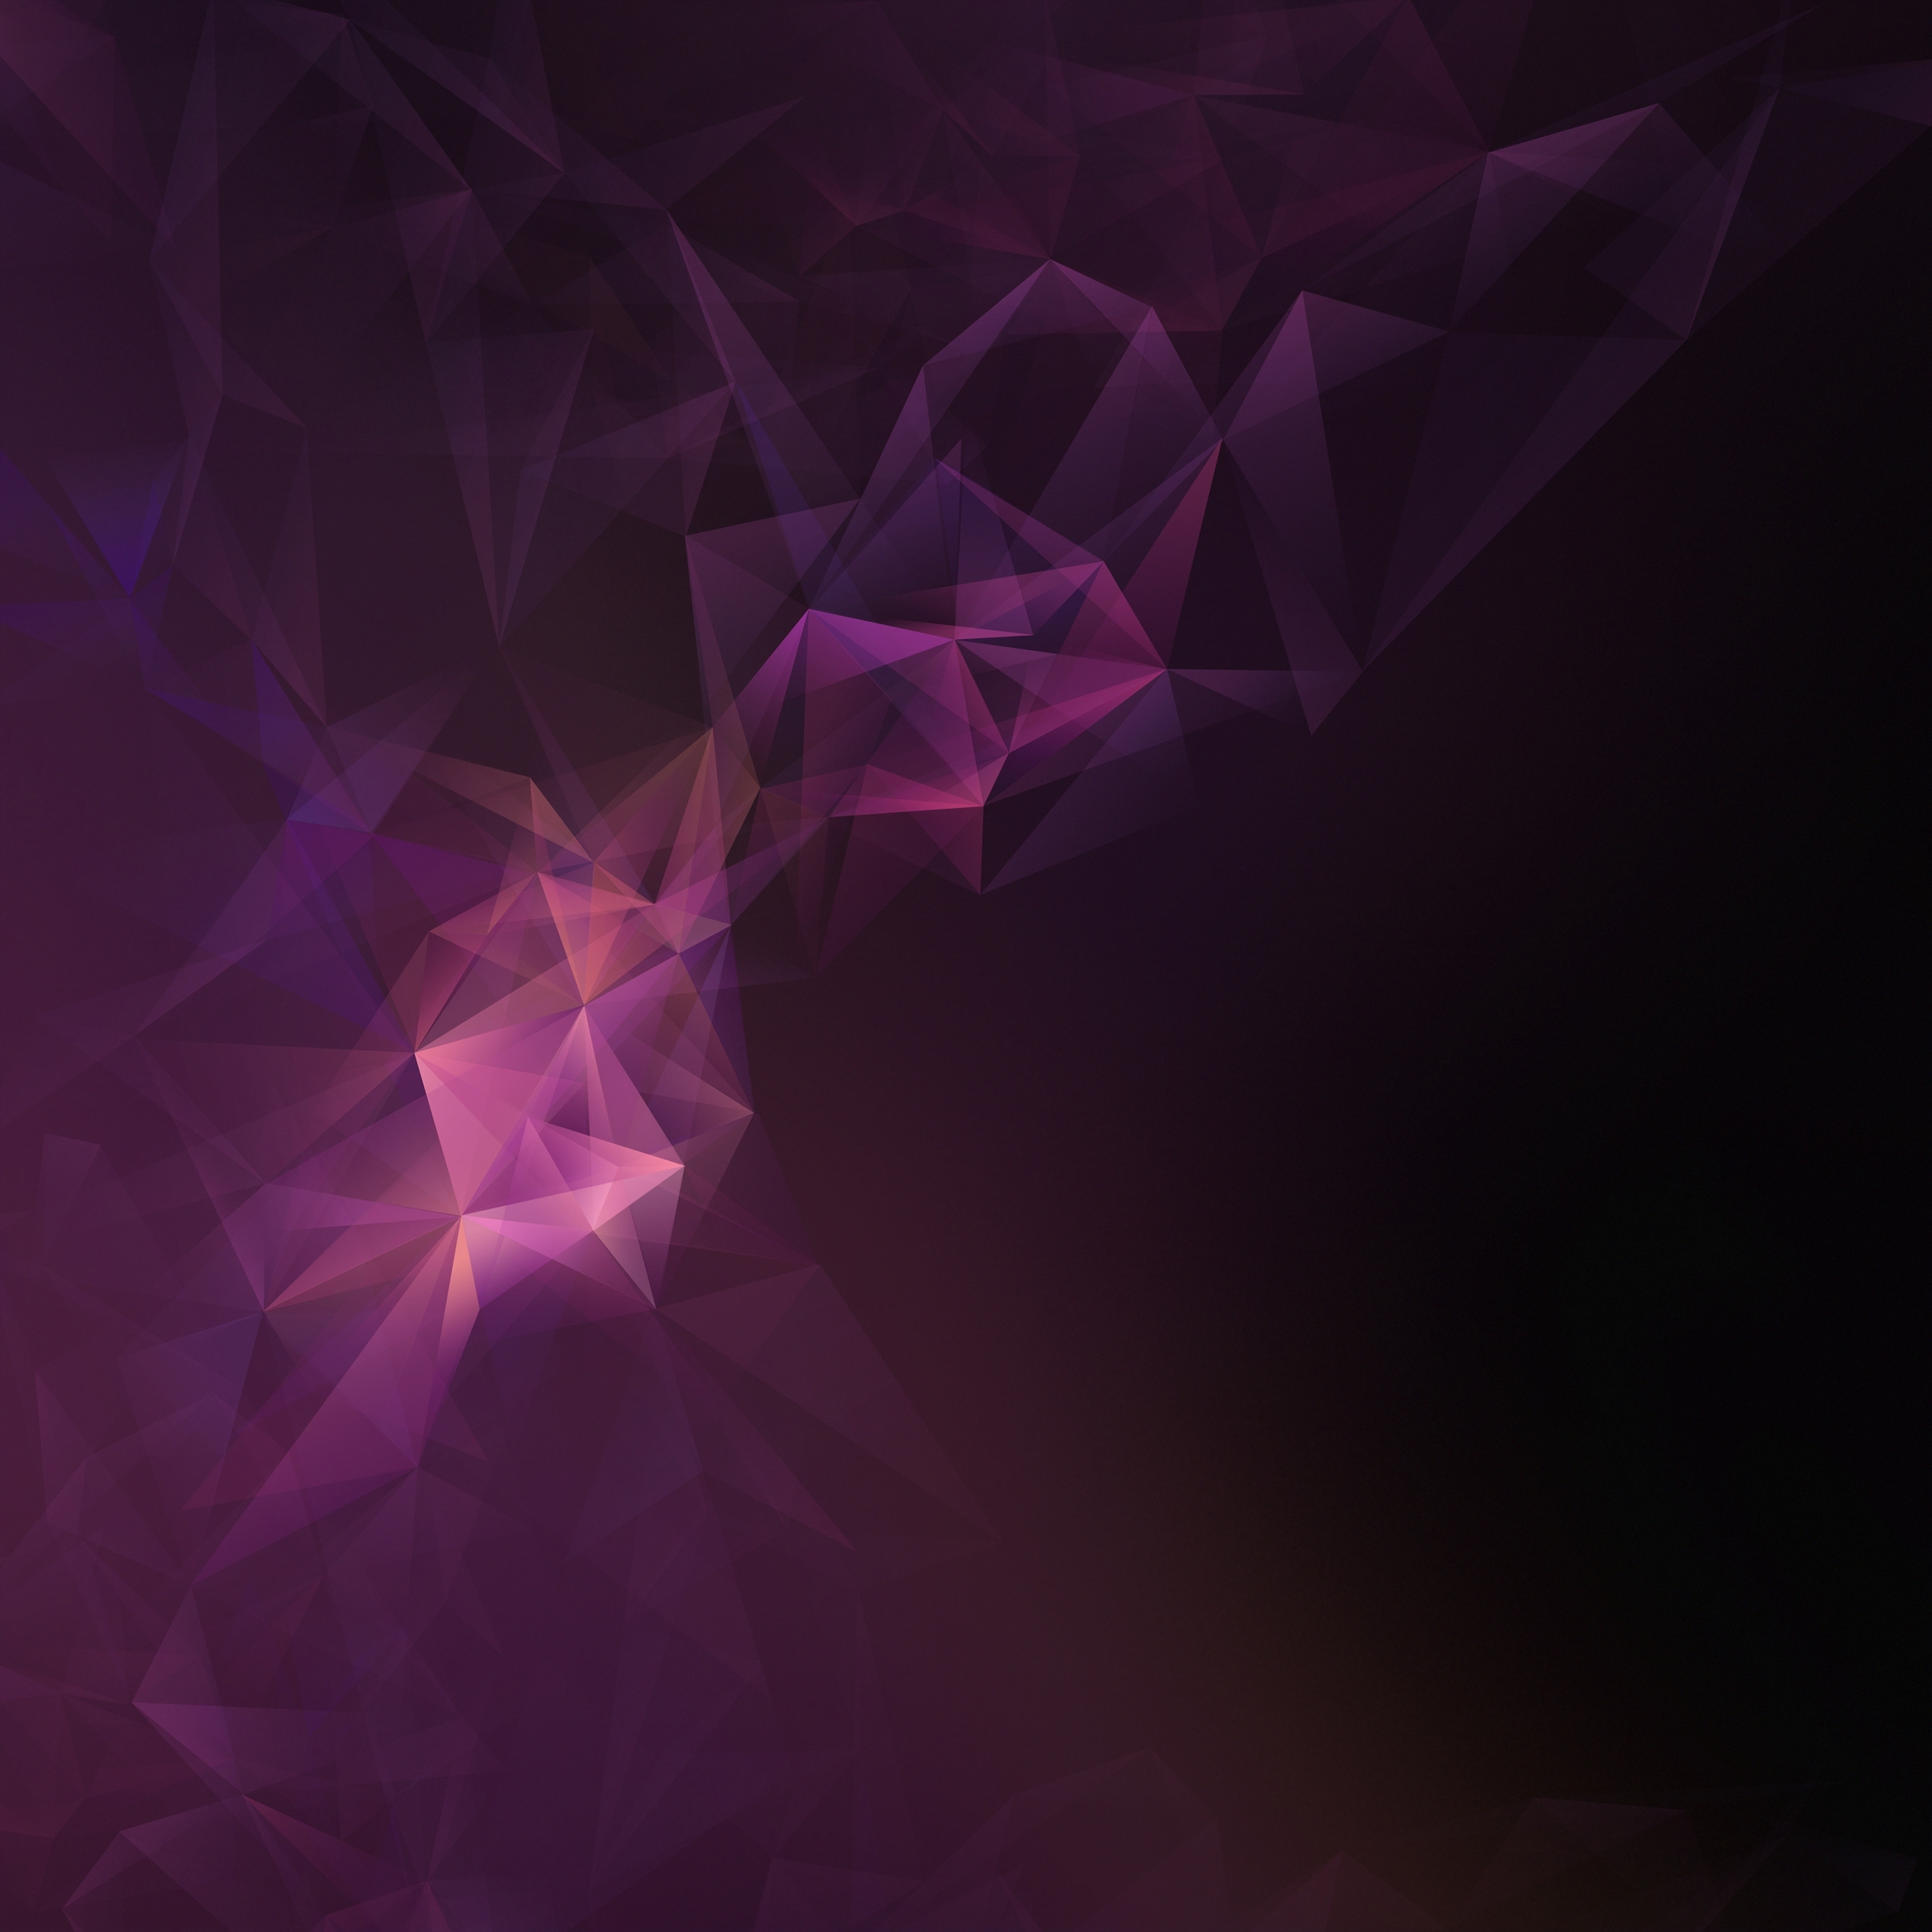 Samsung Galaxy S9 Stock Low-Poly Art Wallpapers